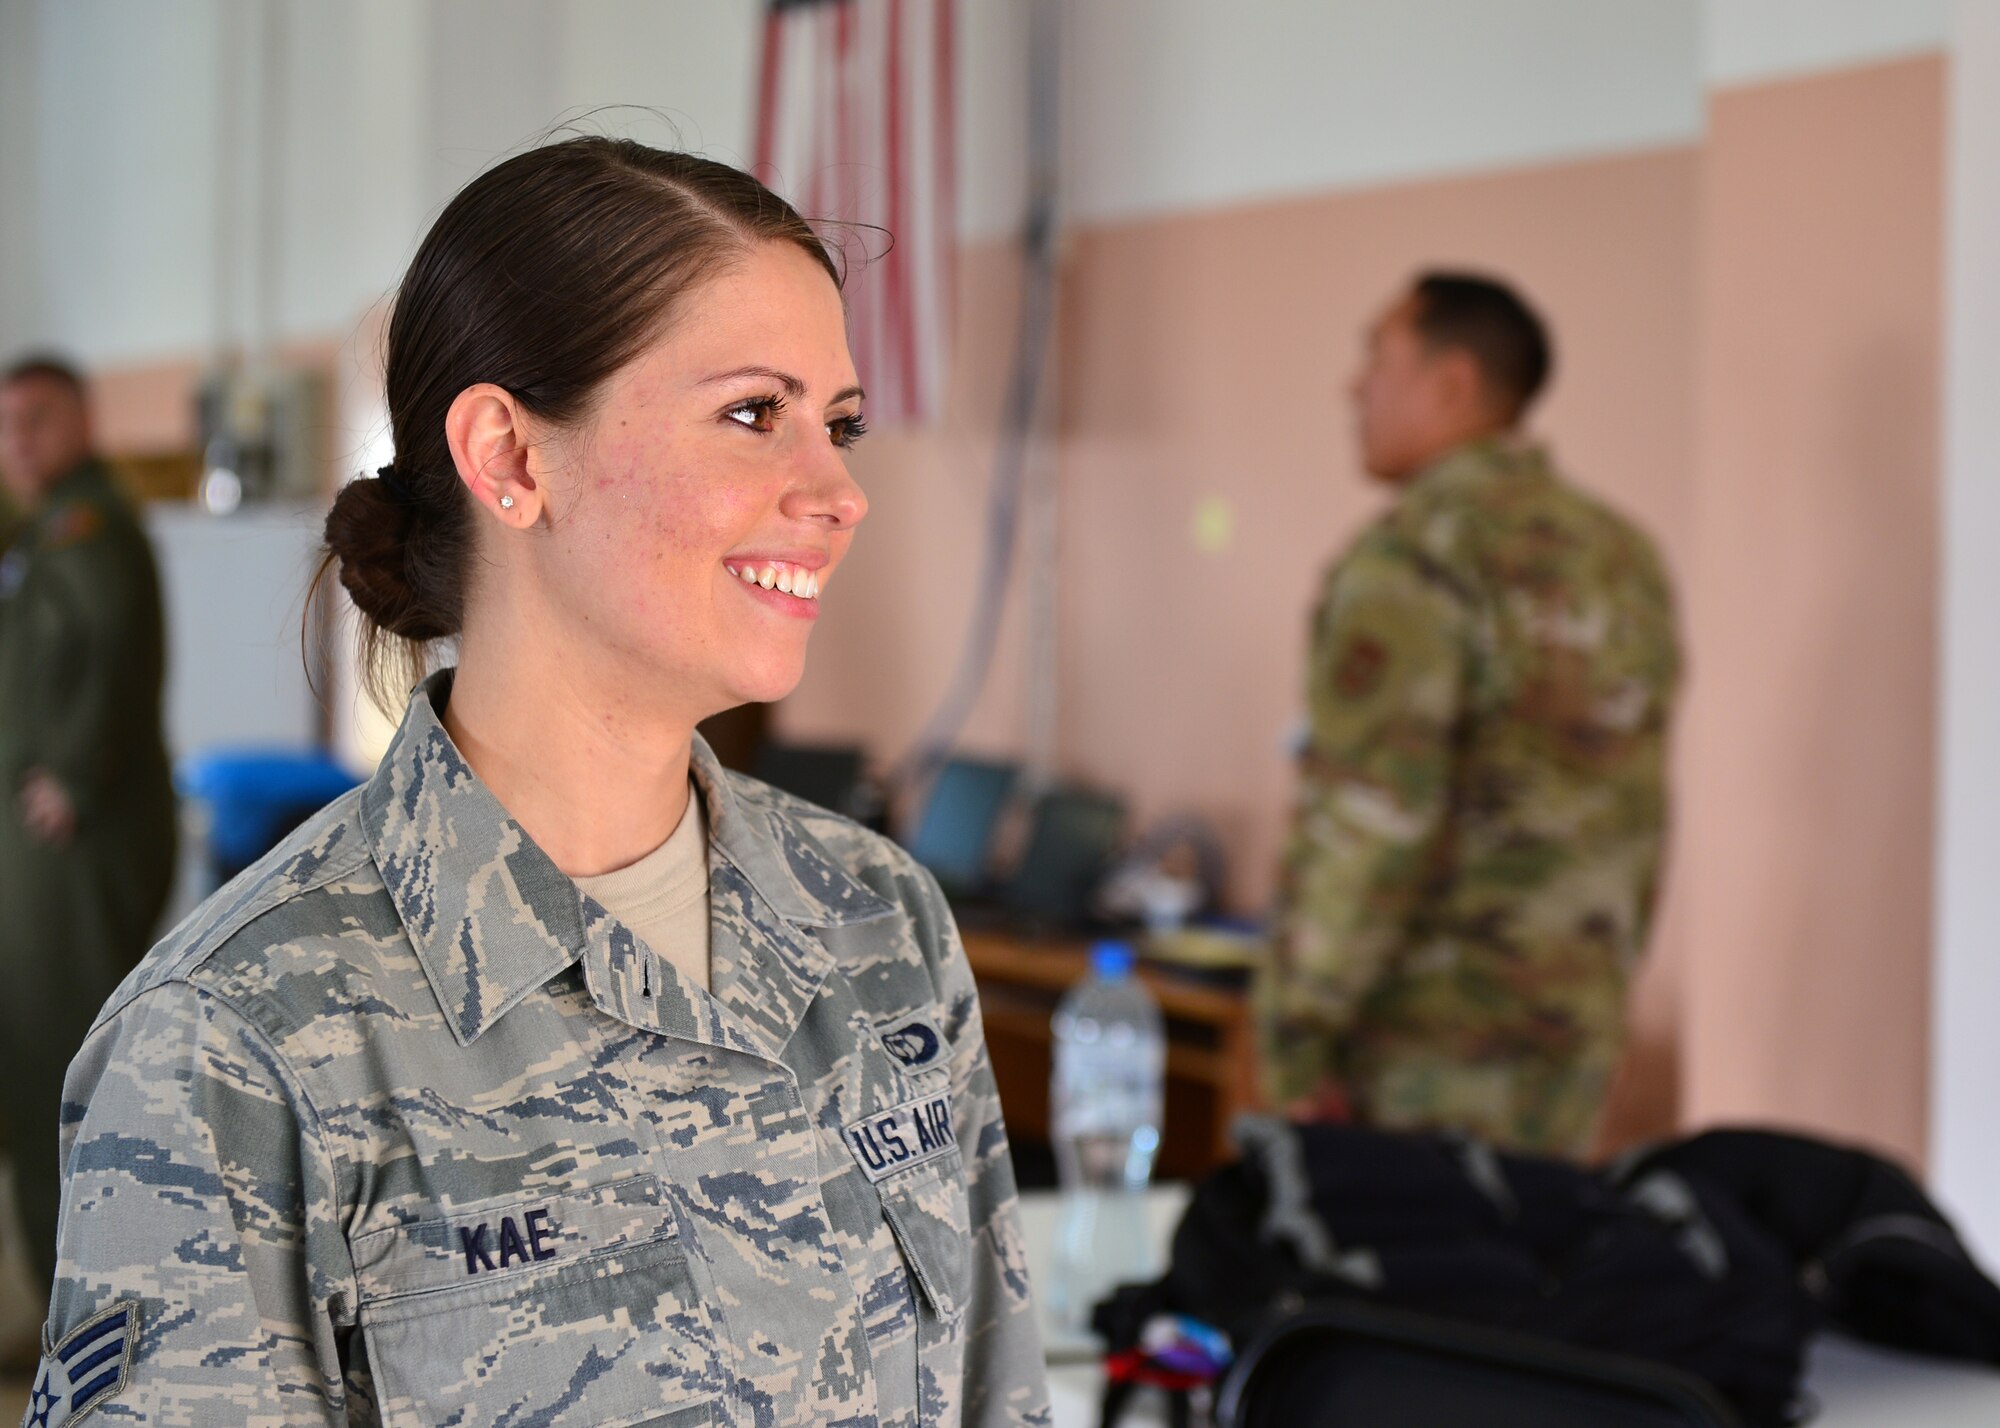 U.S. Air Force Senior Airman Julie Kae, 86th Operations Support Squadron weather forecaster, participates in an interview at Powidz Air Base, Poland, July 10, 2019. Kae was the sole forecaster deployed with the 37th Airlift Squadron in support of Aviation Rotation 19-3 and was responsible for conducting research, consolidating weather information, and briefing aircrew members before flights. (U.S. Air Force photo by Staff Sgt. Jimmie D. Pike)